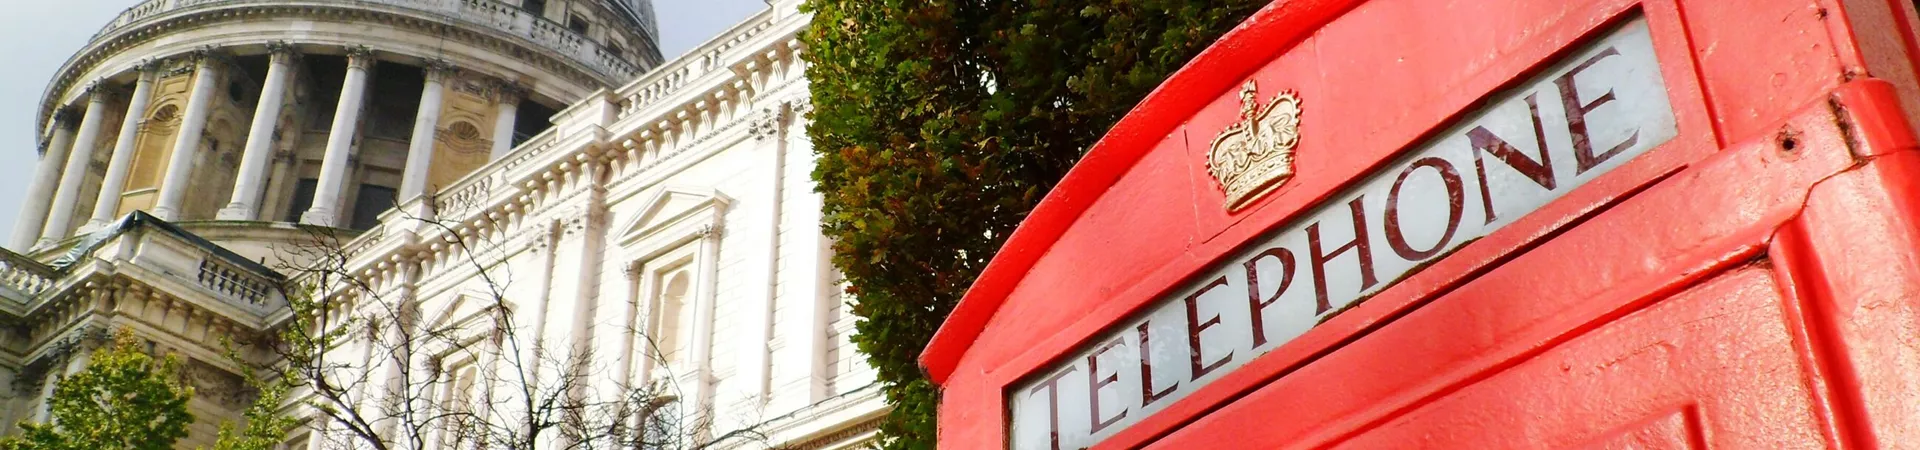 Red telephone booth against St Paul Cathedral in London, United Kingdom